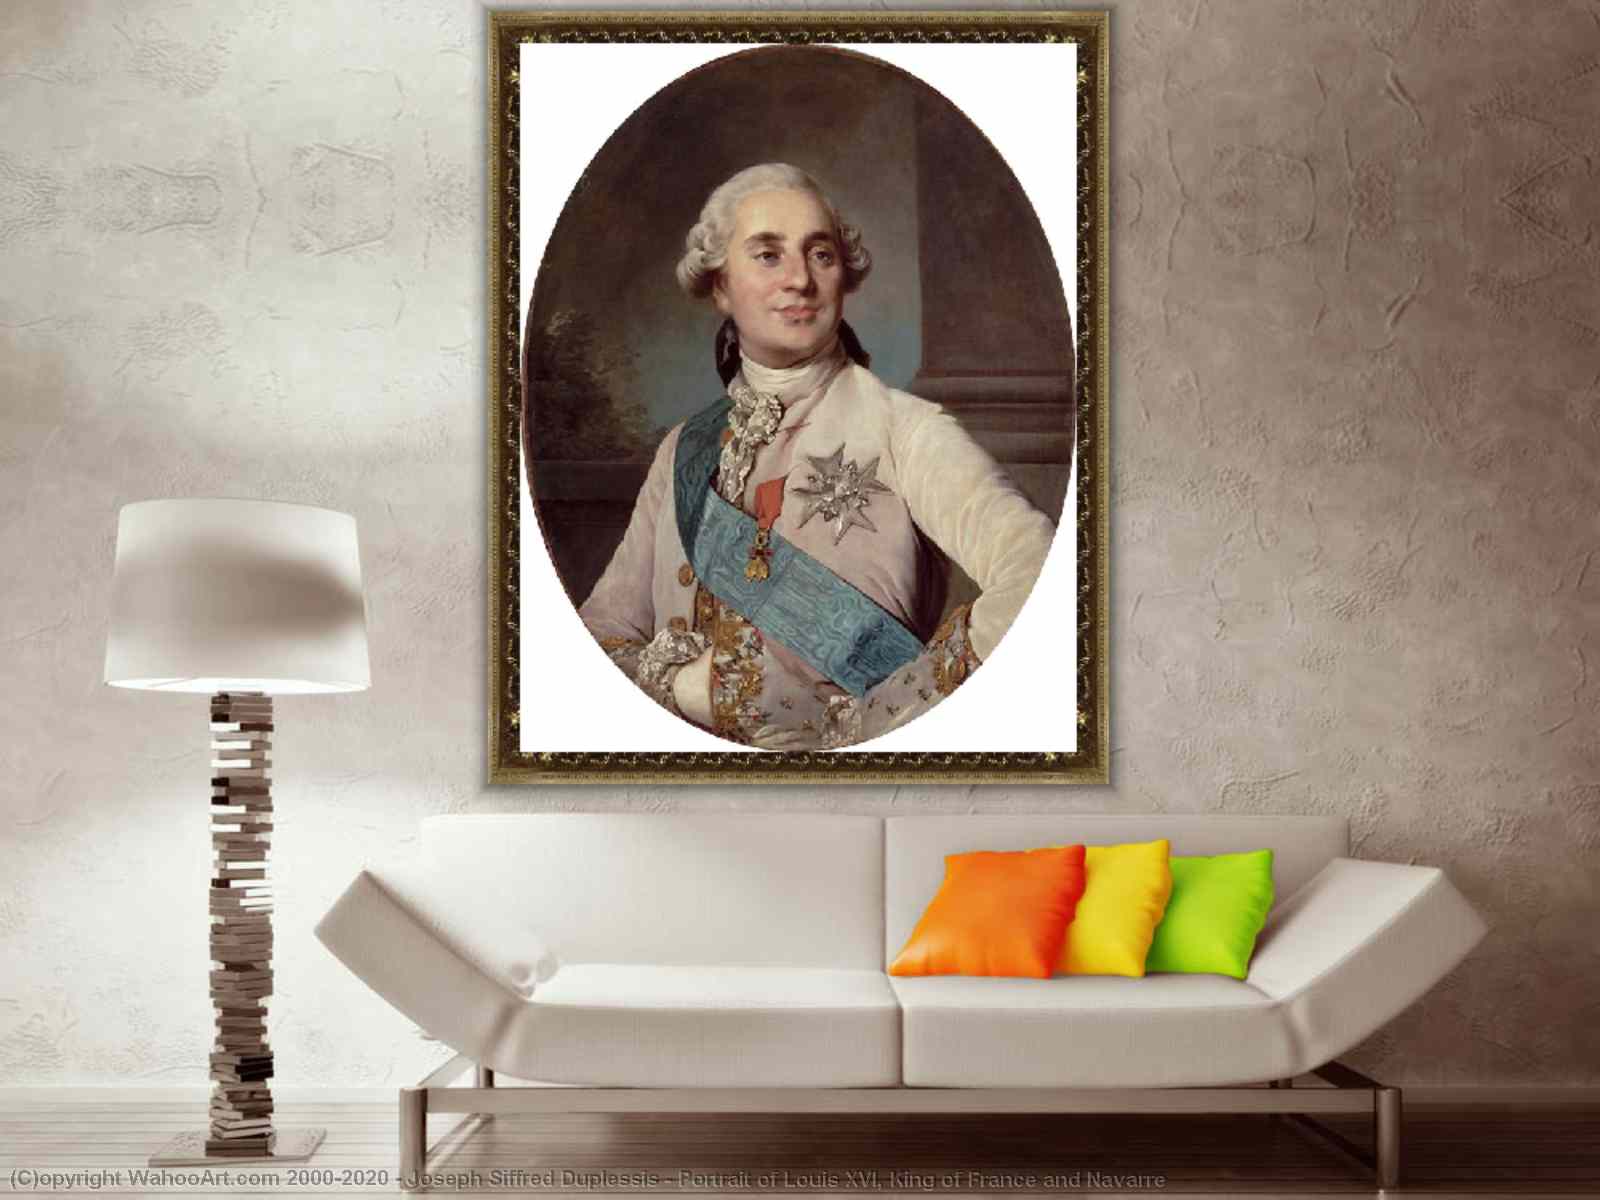 Joseph Siffred Duplessis (1725-1802) - Louis XVI, King of France (1754-1793)